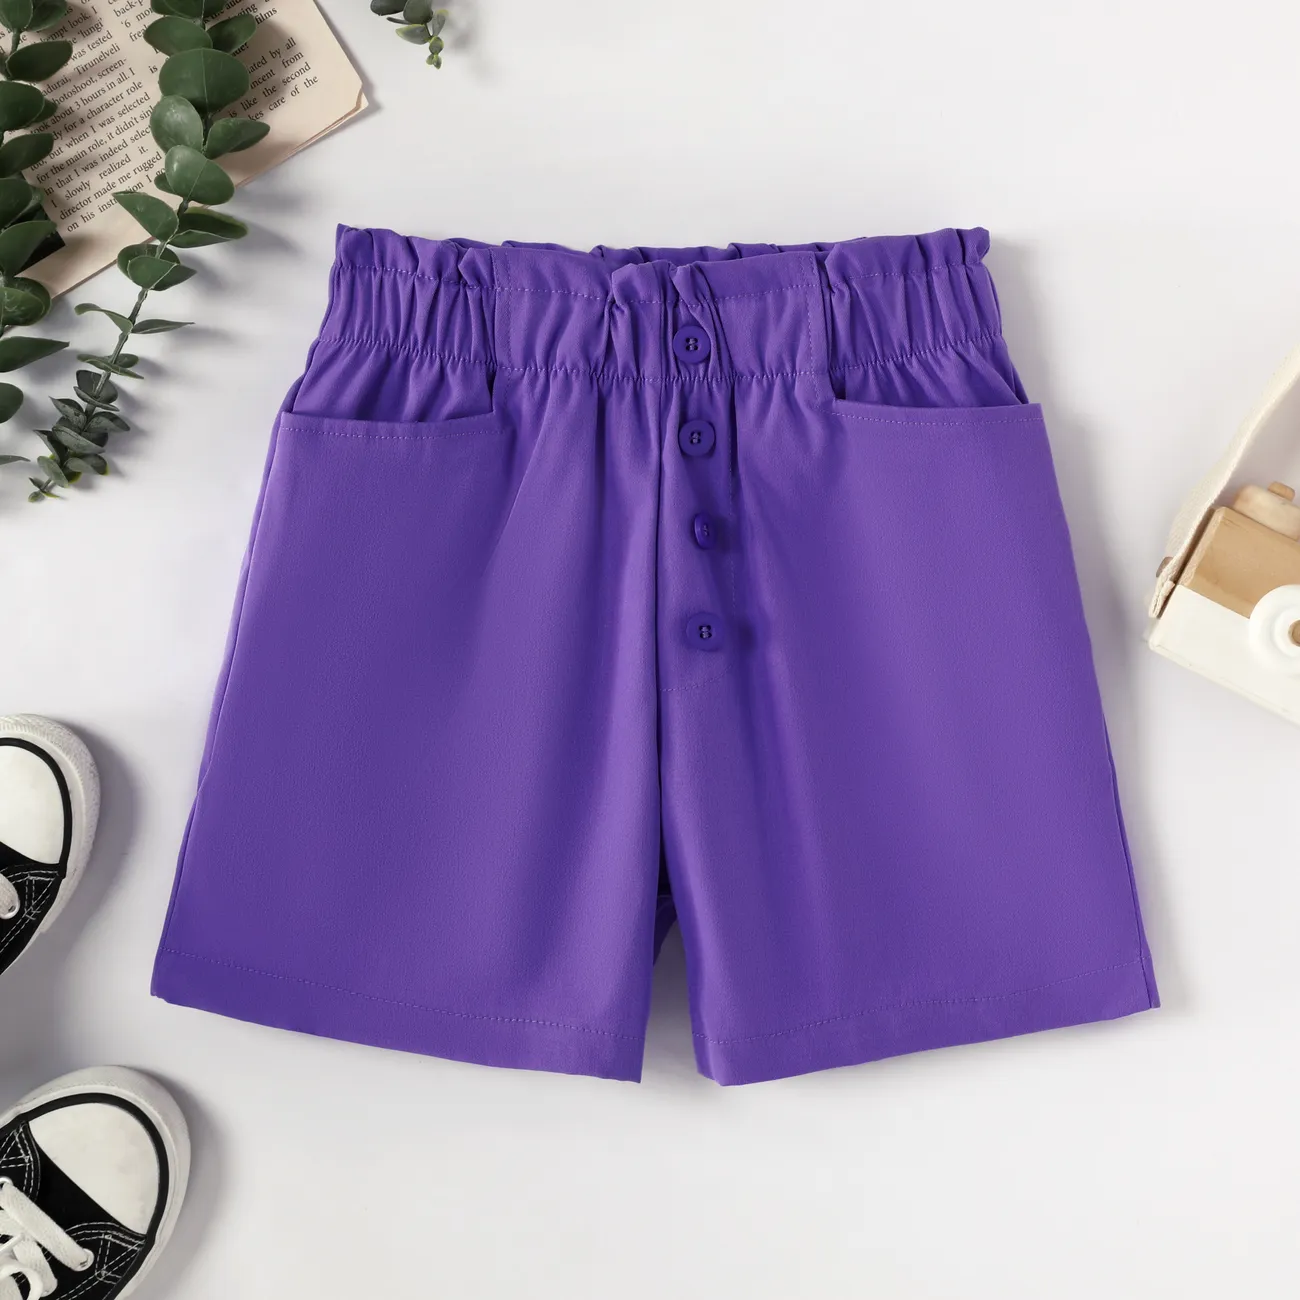 Cute High-Waisted Lace Shorts for Girls, Polyester Fabric, 1pc Set, Casual Style, Solid Color Purple big image 1